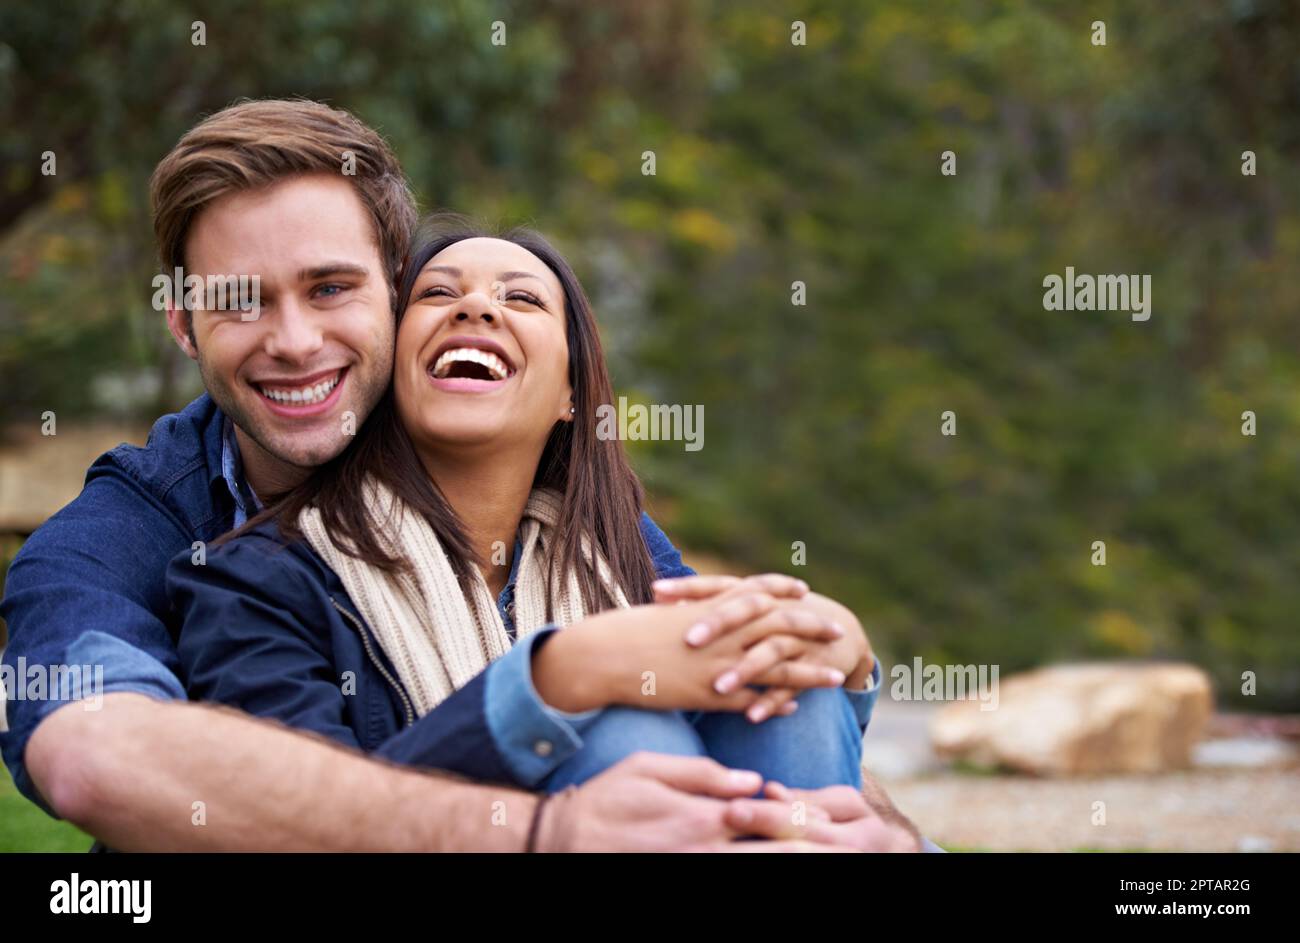 I just love your sense of humour. a good-looking young couple enjoying an affectionate moment outdoors Stock Photo